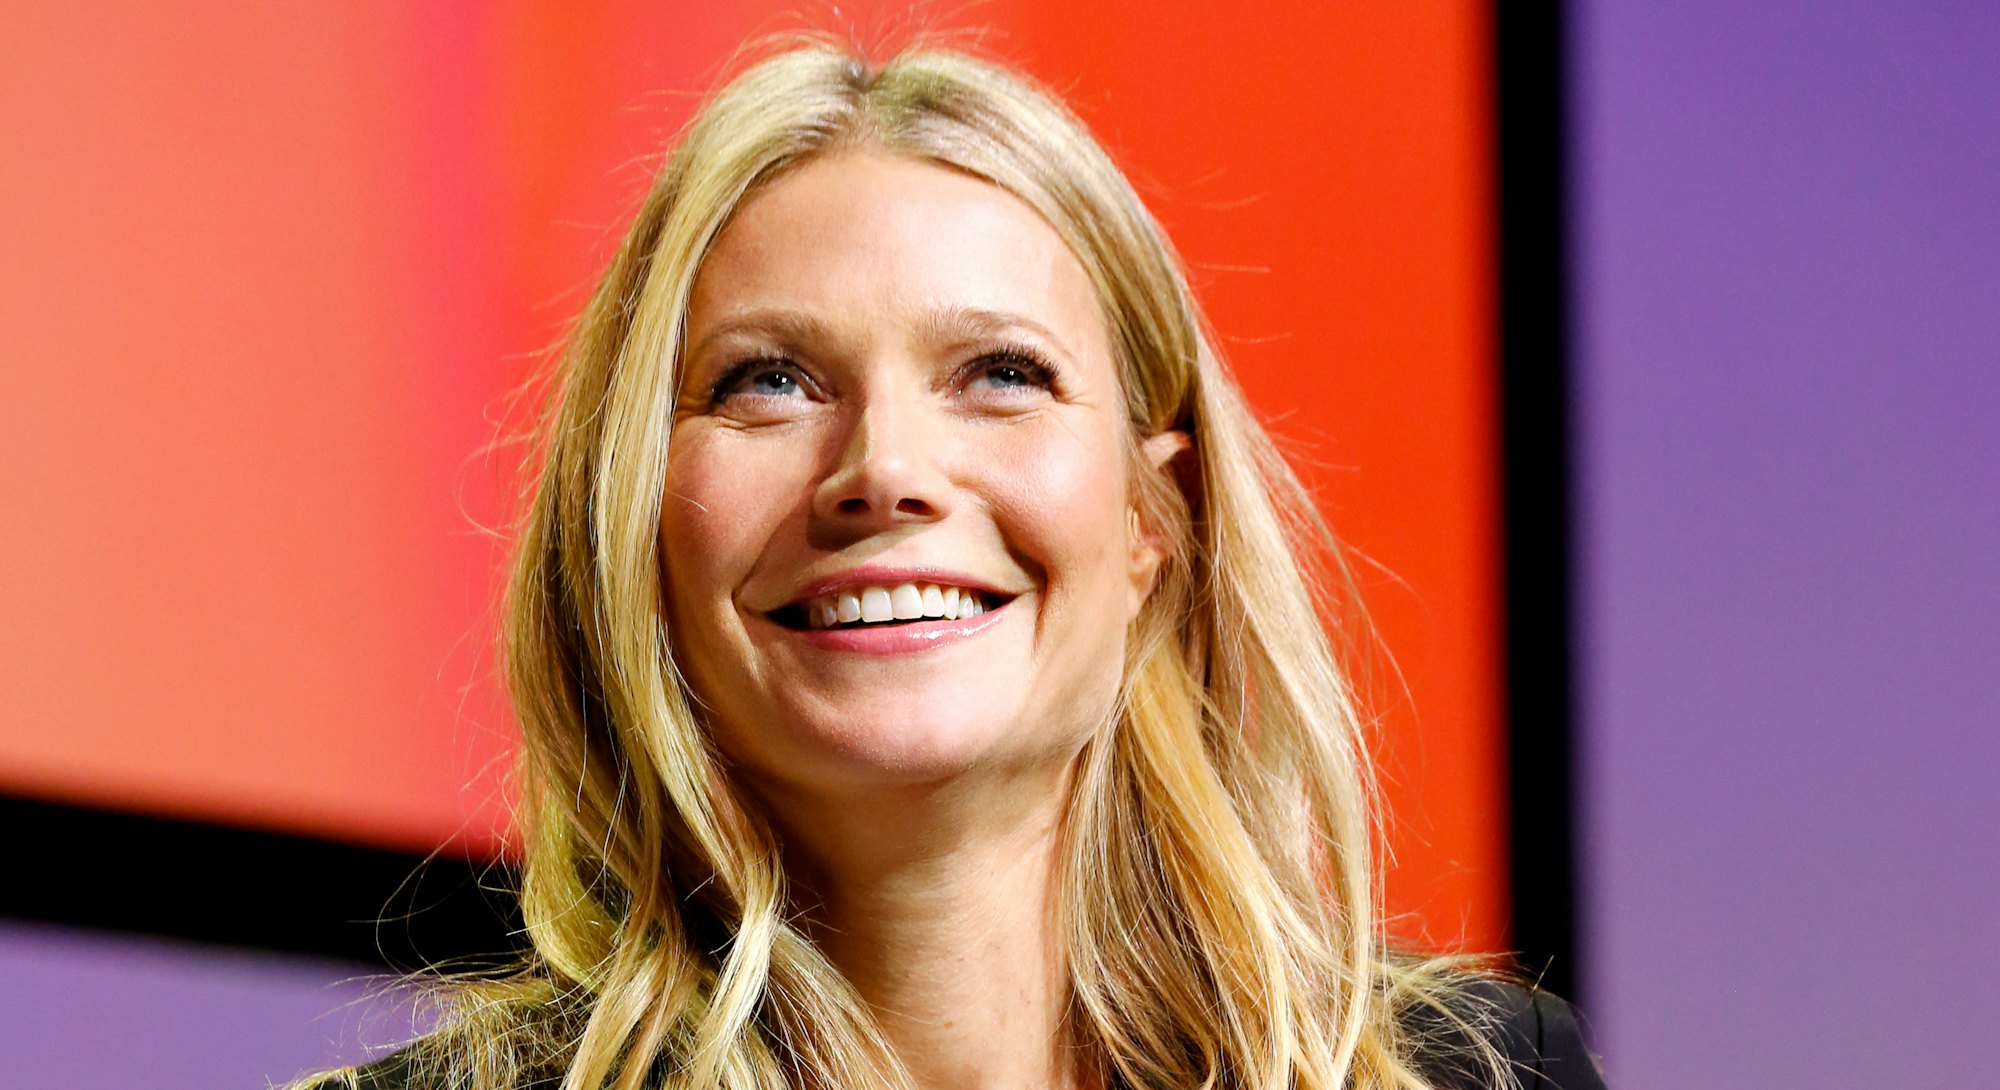 Gwyneth Paltrow has had some inspiring quotes on motherhood throughout the years.